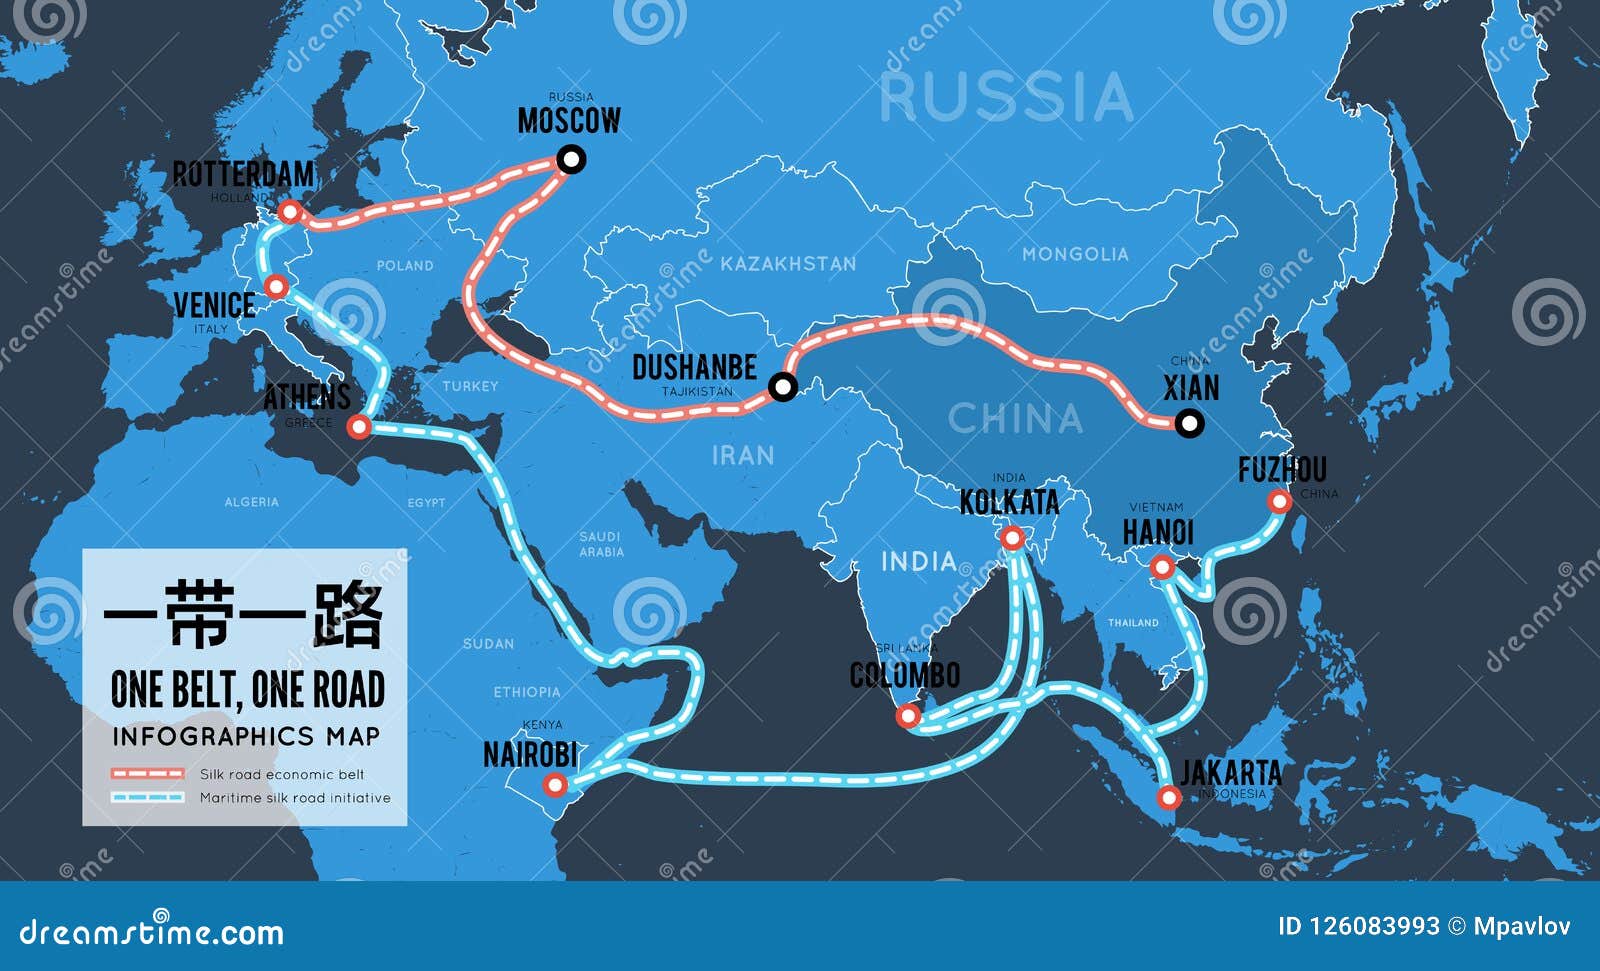 one belt one road. new chinese trade silk road.  map infographics